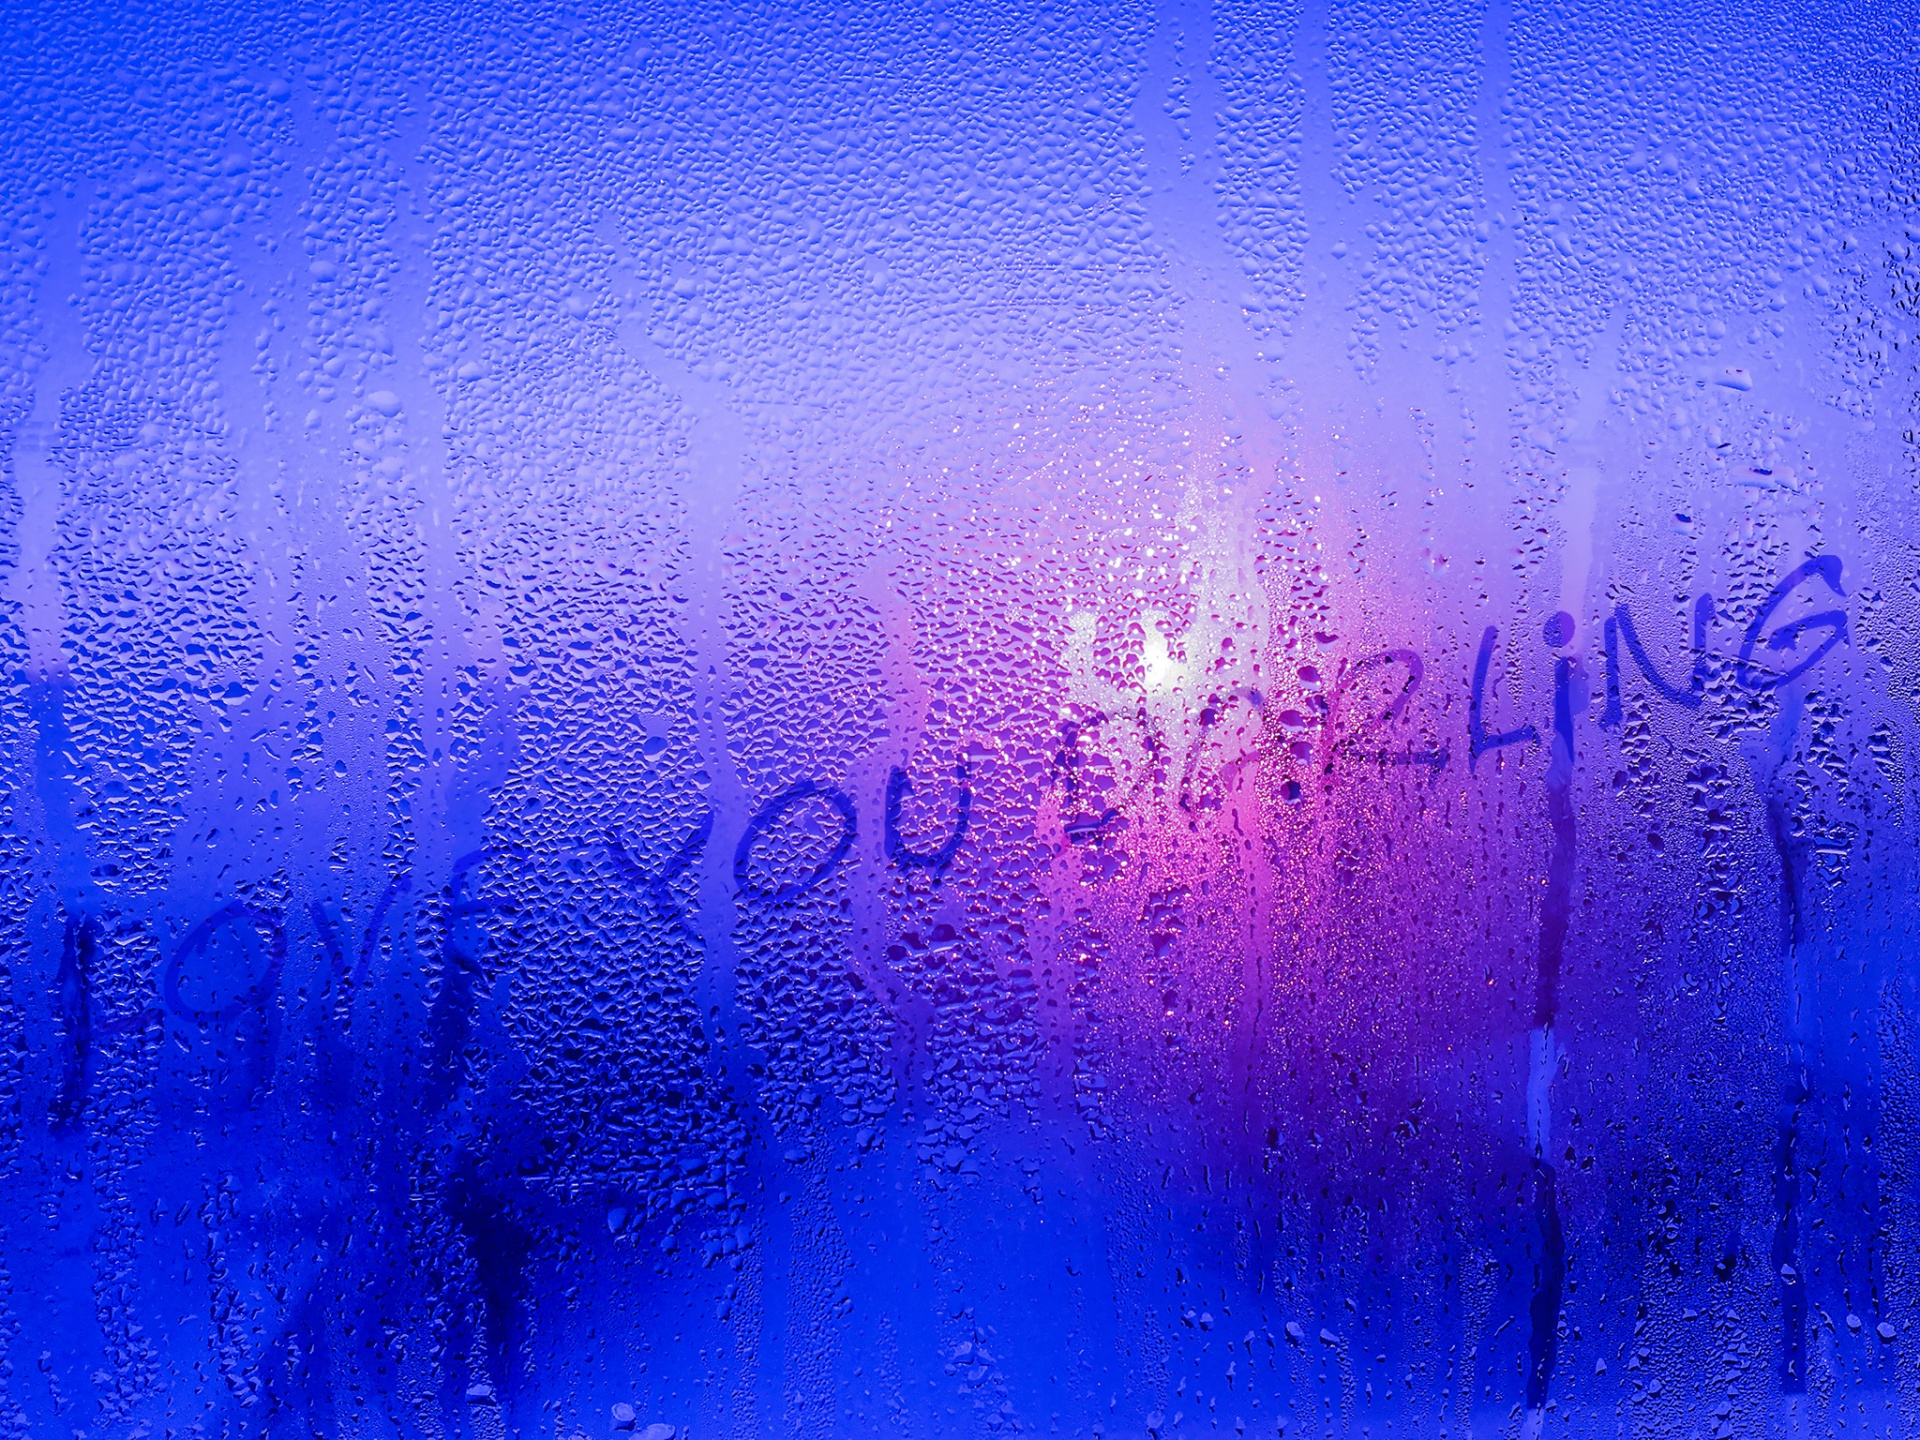 A steamy love you message